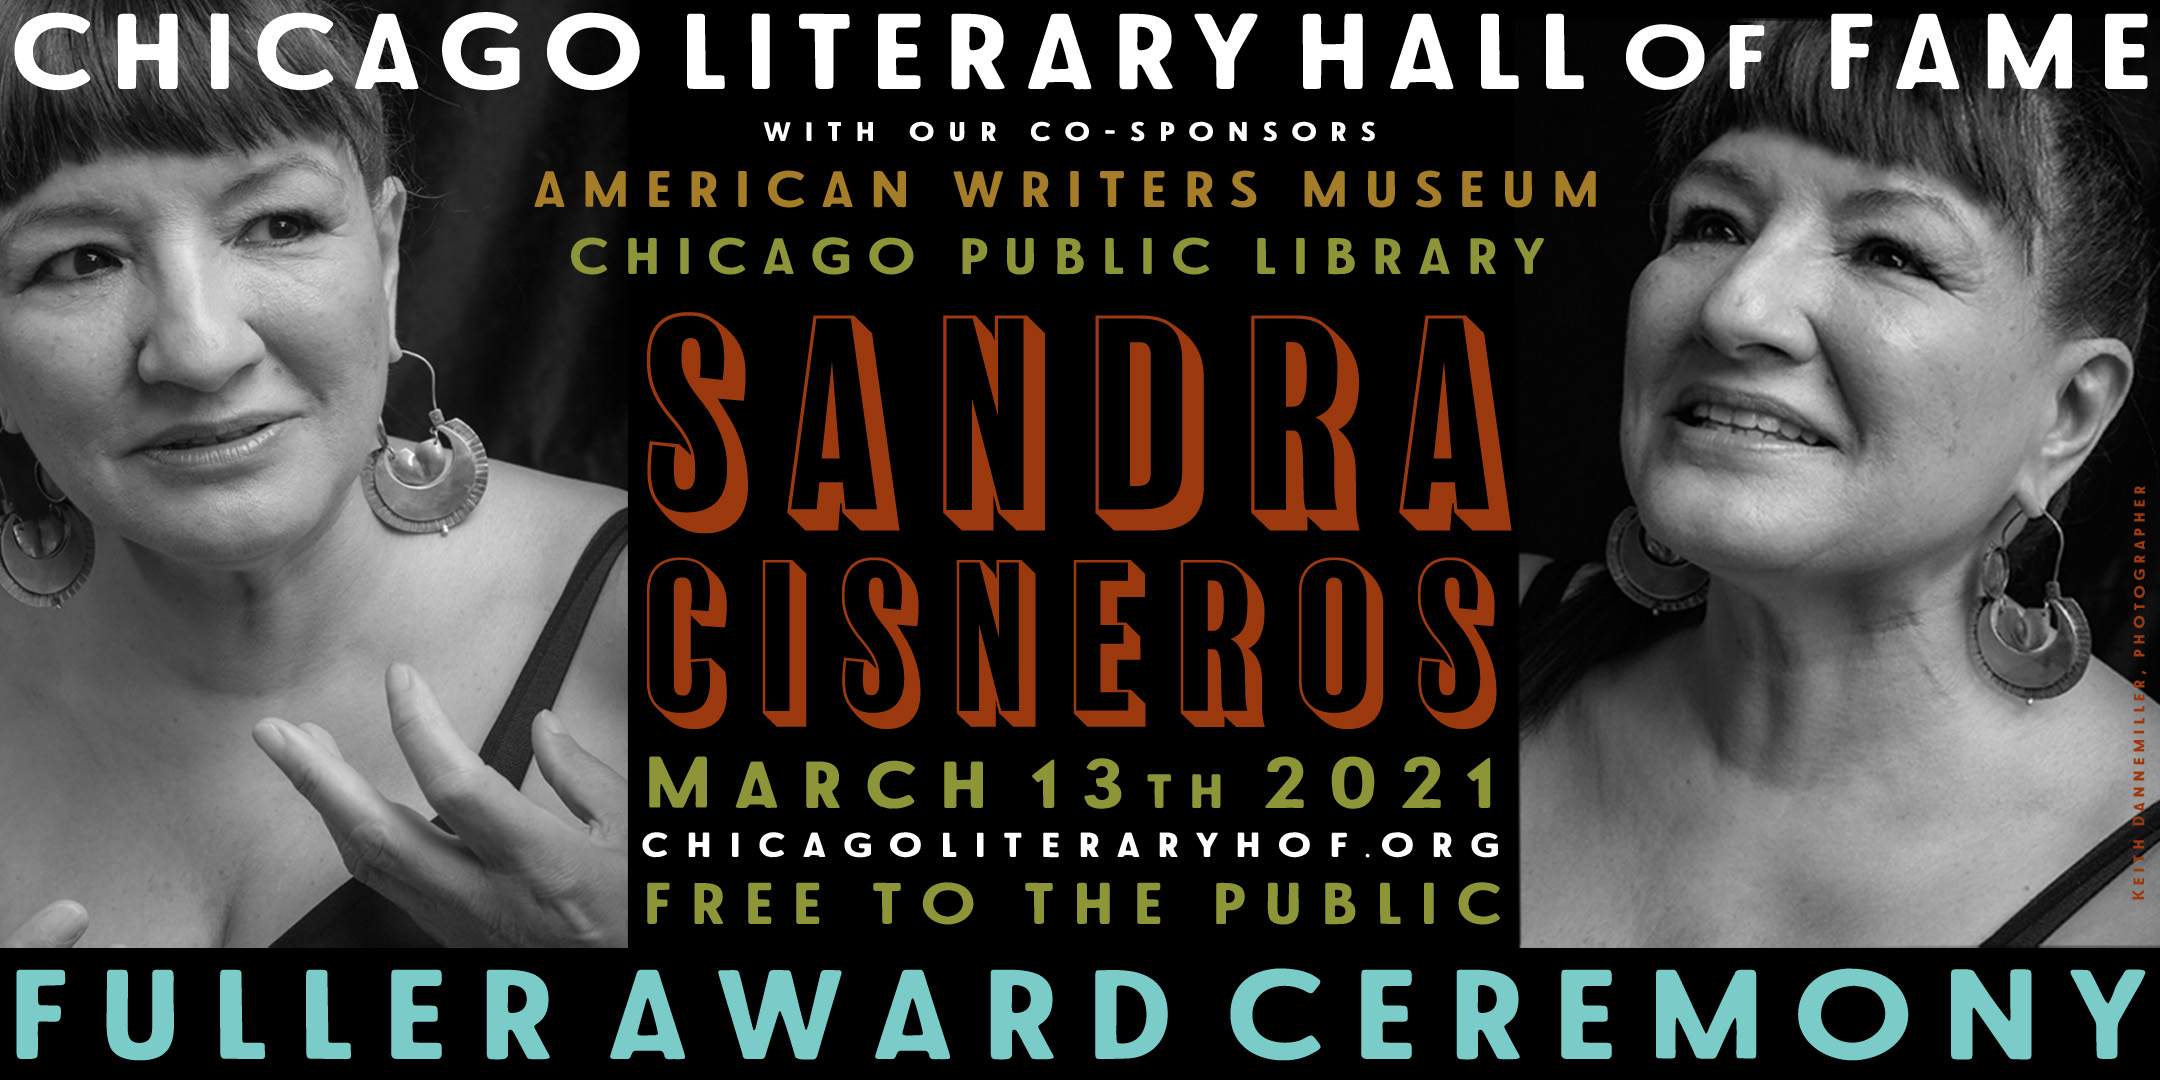 IMAGE: two photos of Sandra Disneros, speaking and smiling. TEXT: Event information